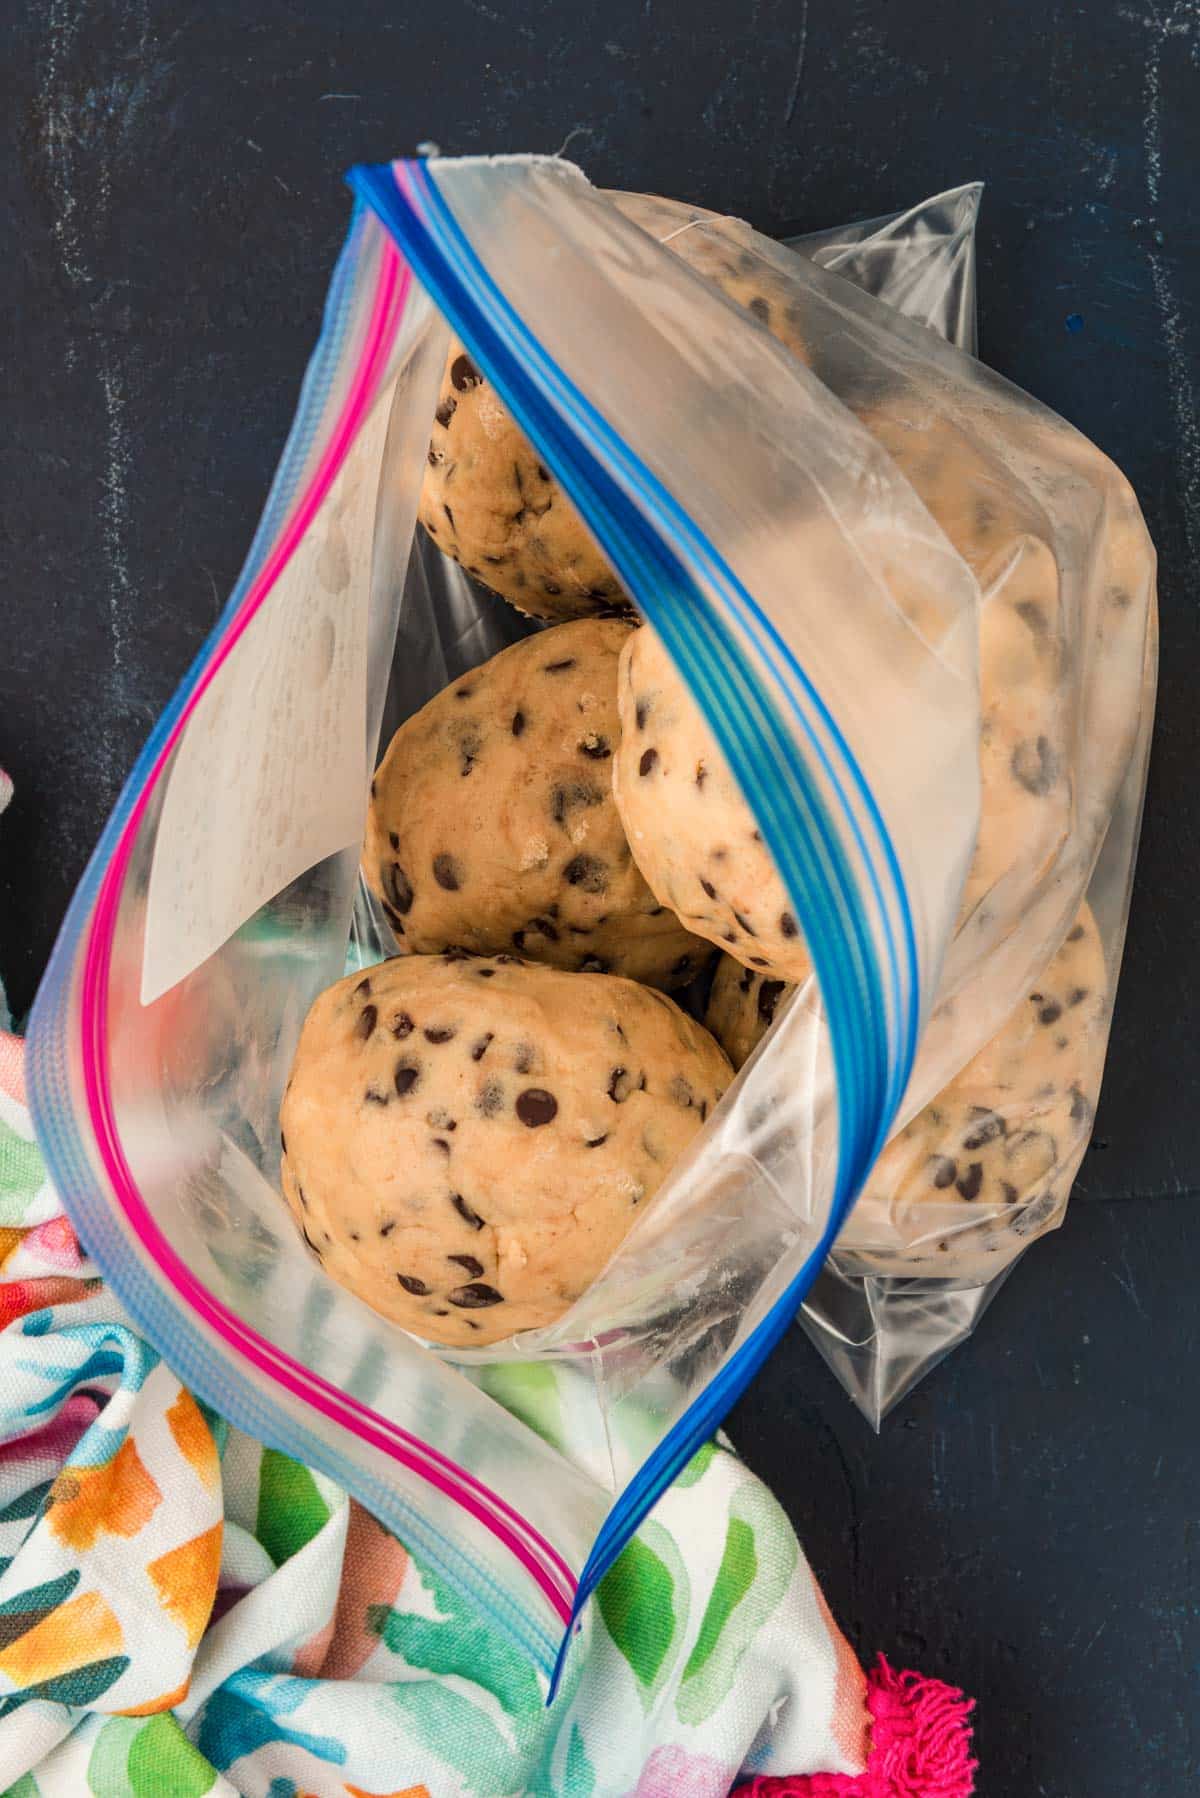 https://www.sugarandsoul.co/wp-content/uploads/2022/09/giant-chocolate-chip-cookies-10.jpg